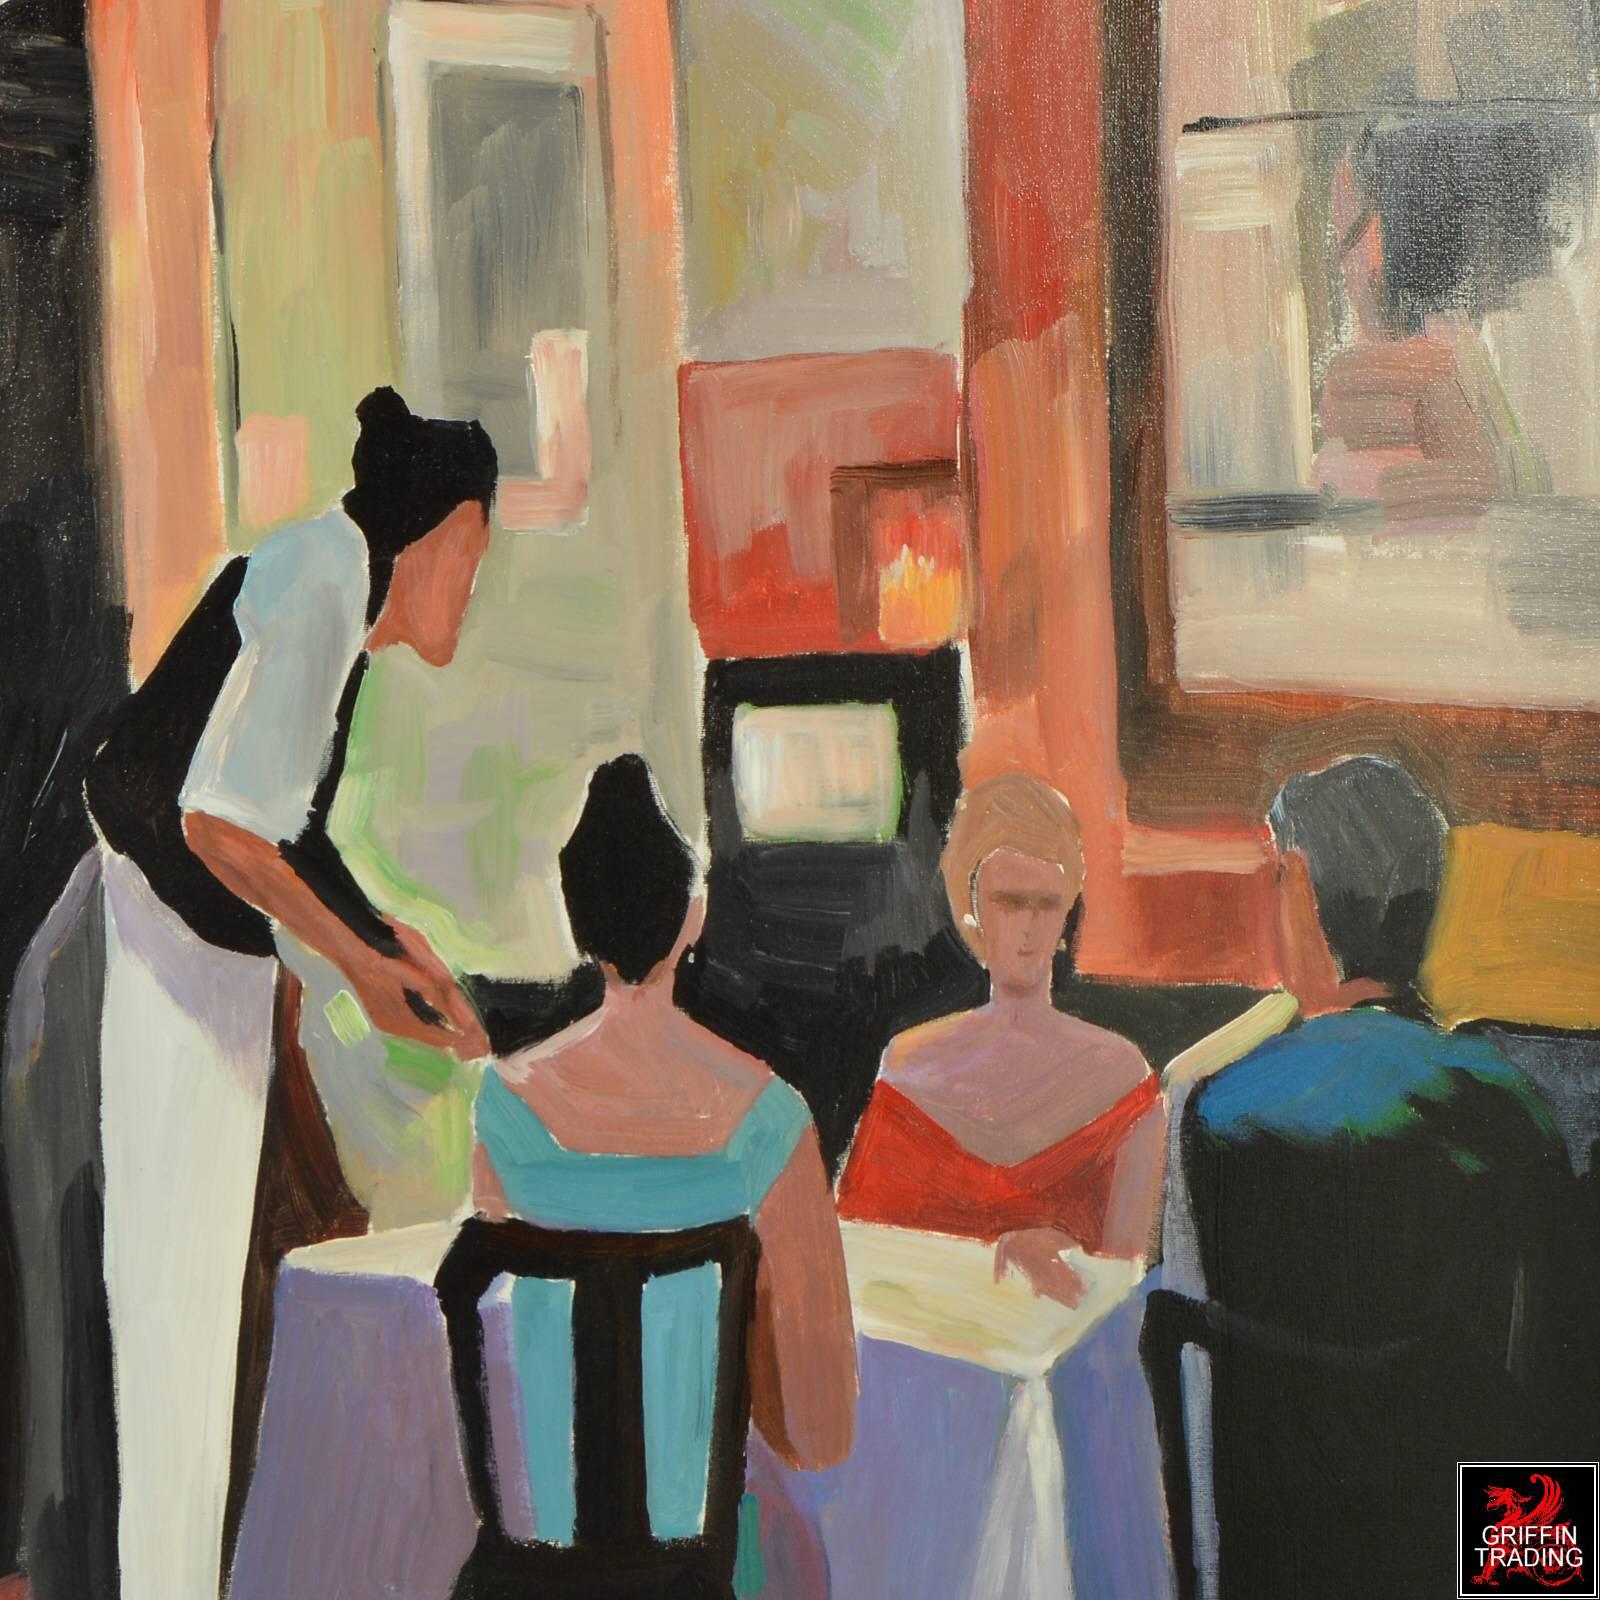 American Le Cafe French Restaurant Scene Signed Original Painting For Sale